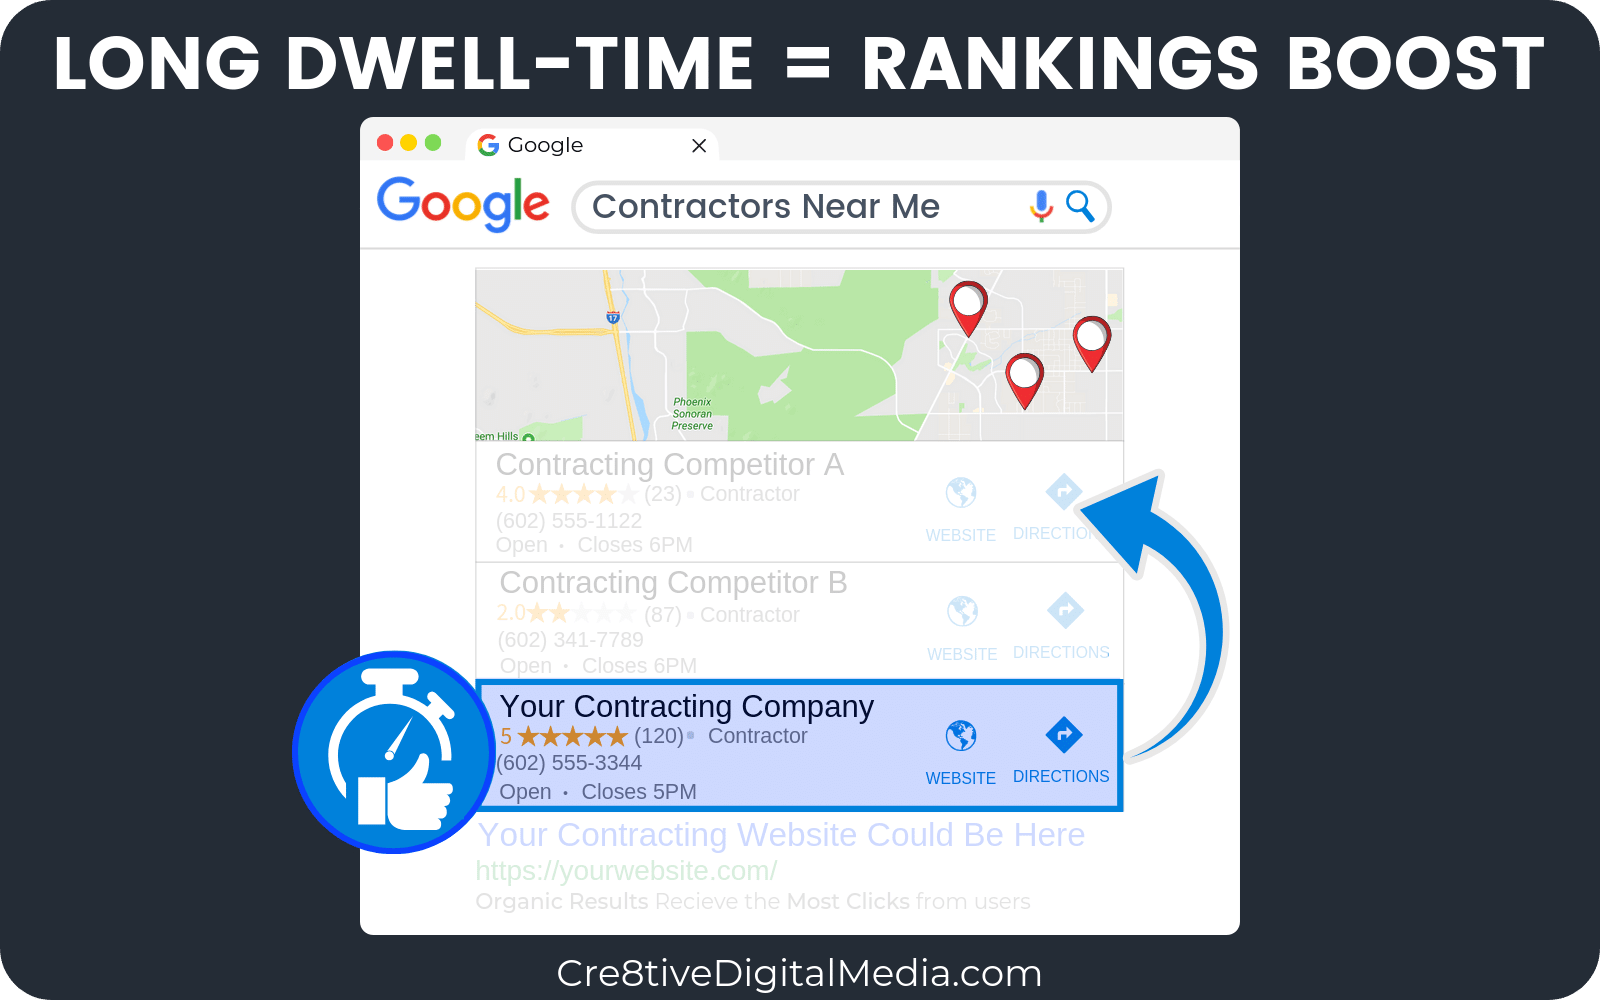 Long Dwell-Time from a lot of users = Rankings Boost